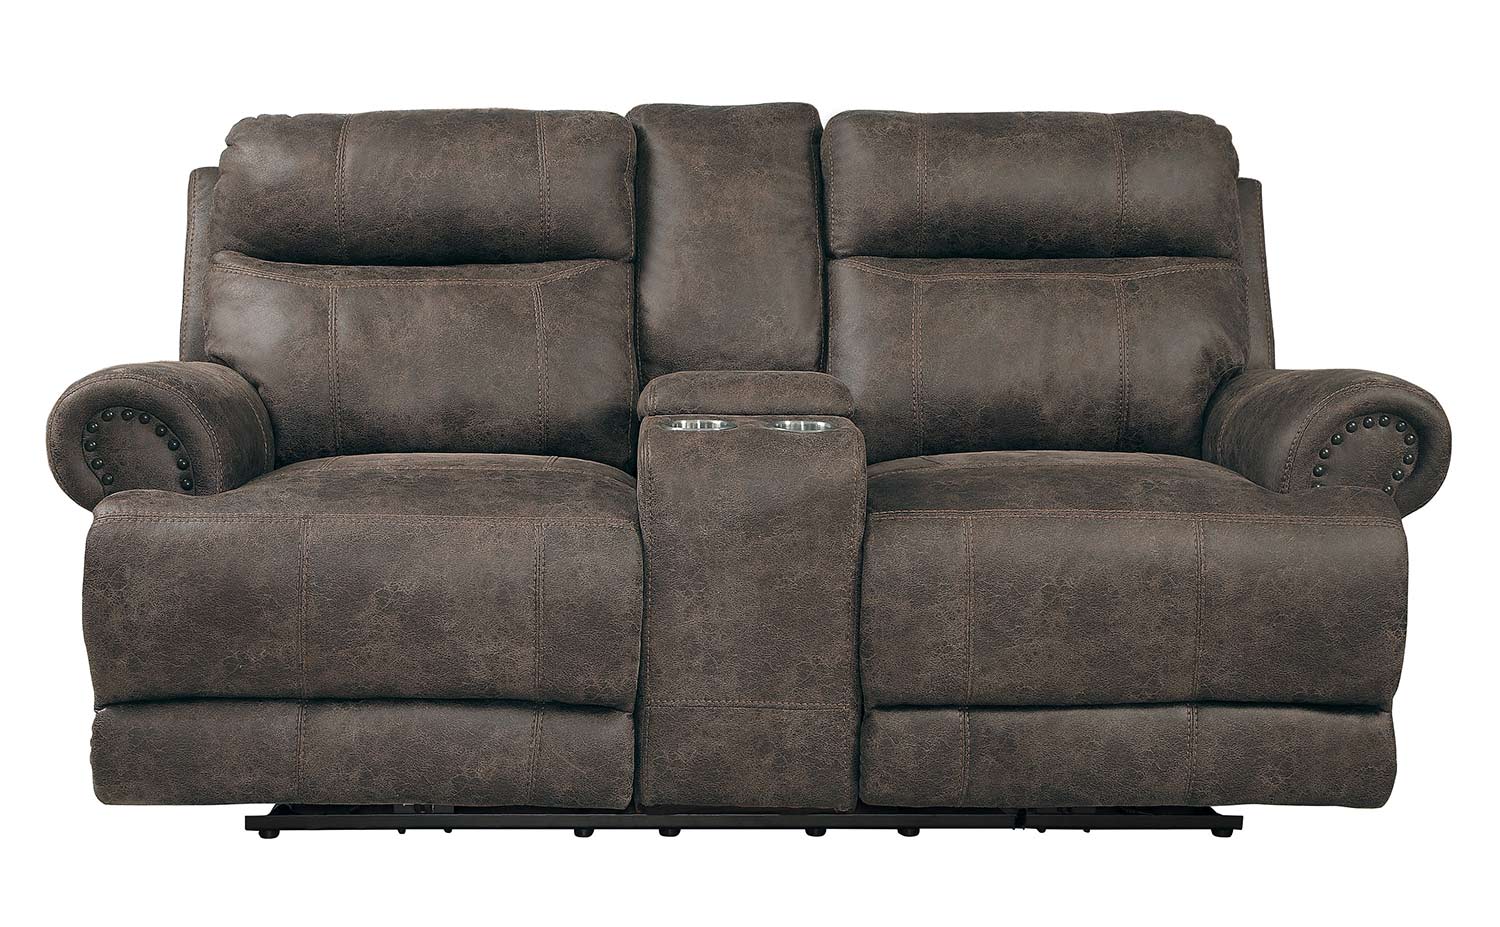 Homelegance Aggiano Double Reclining Love Seat - Dark Brown